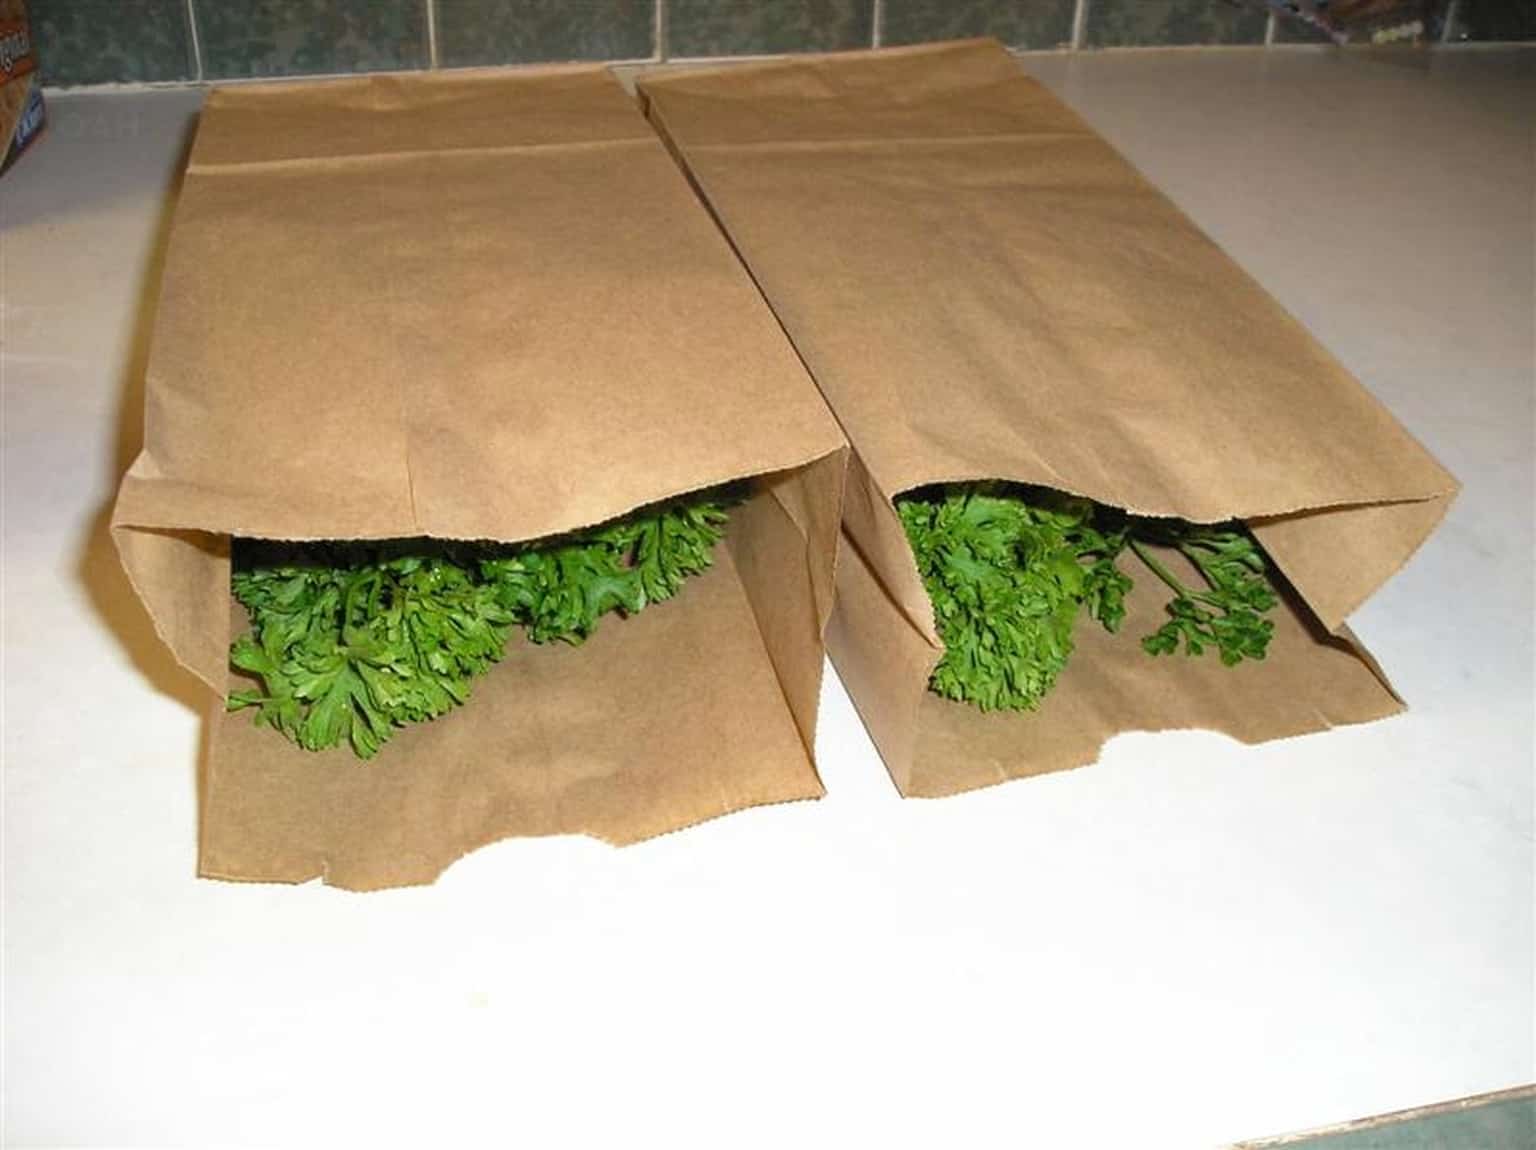 parsley inside two brown paper bags